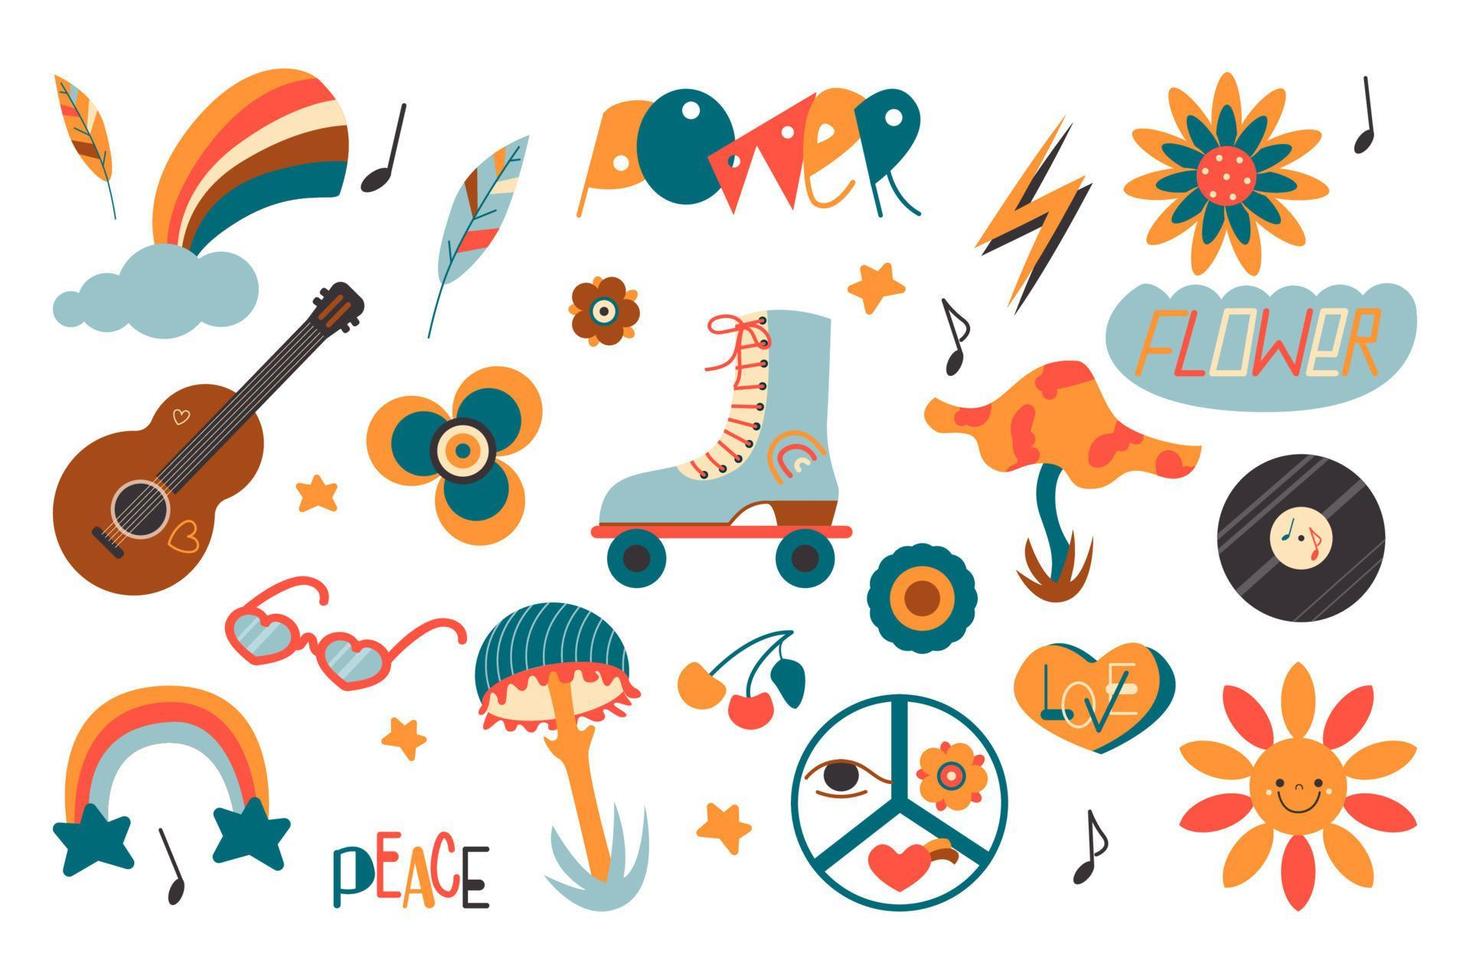 Hippie retro colorful icons set in cartoon style. Vintage collection of hipster elements. 1970s color sign logo. Flat vector illustration isolated on white background